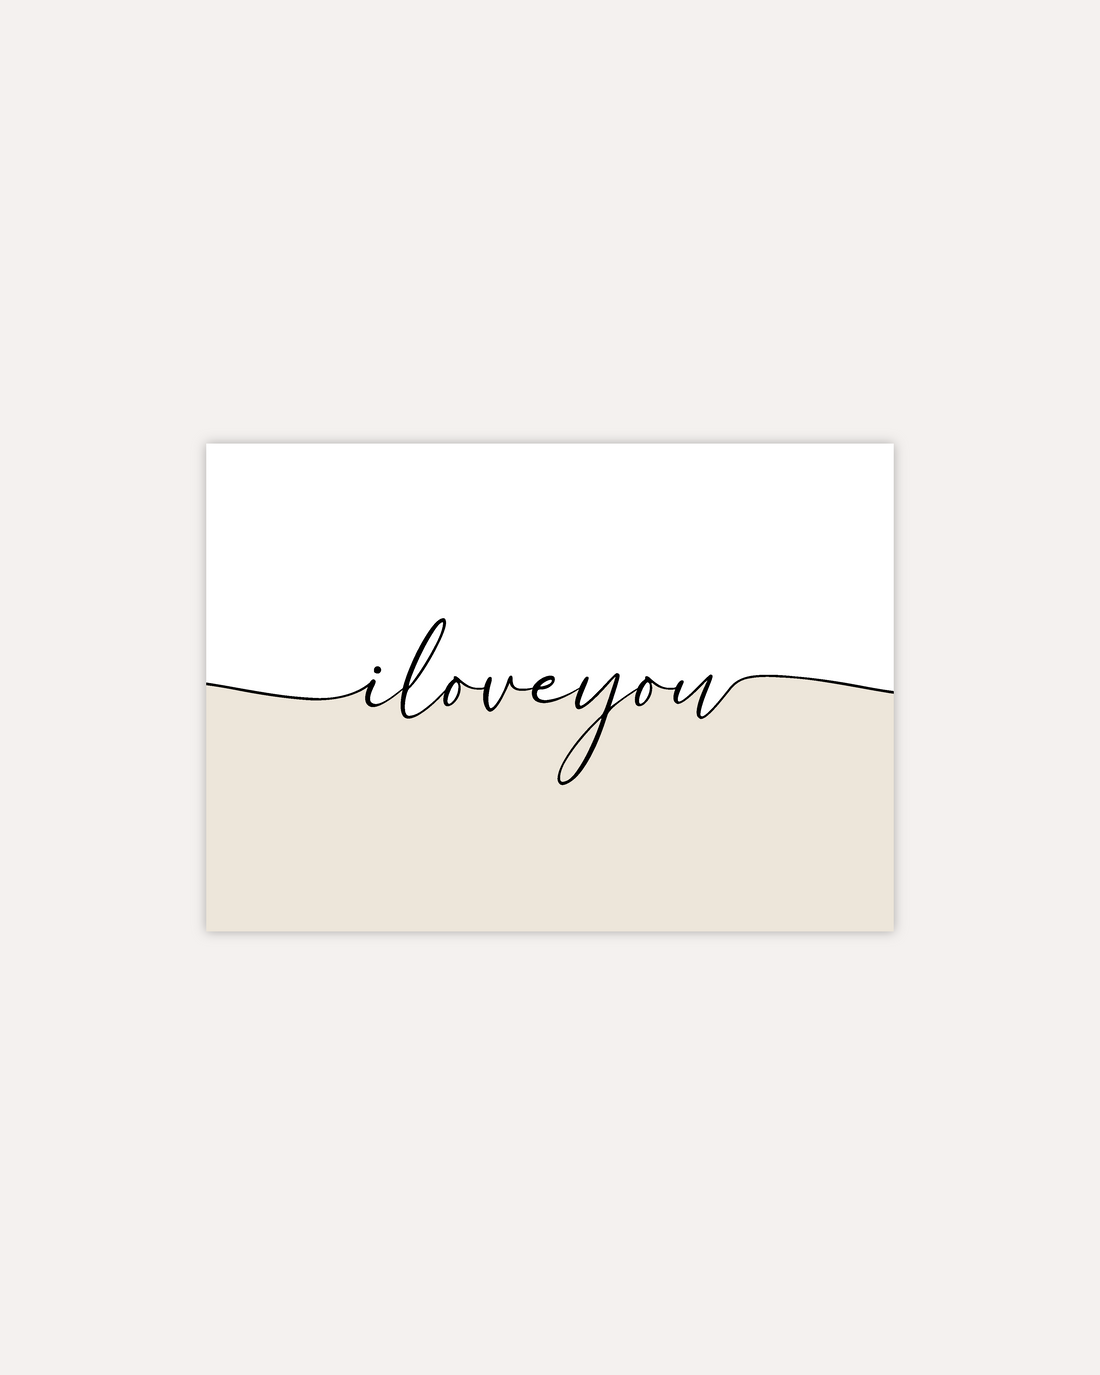 A postcard design reading &quot;I love you&quot; in black cursive writing, that splits the card into two halves. The top half is white and the bottom half is beige. The design is shown on a beige backround.